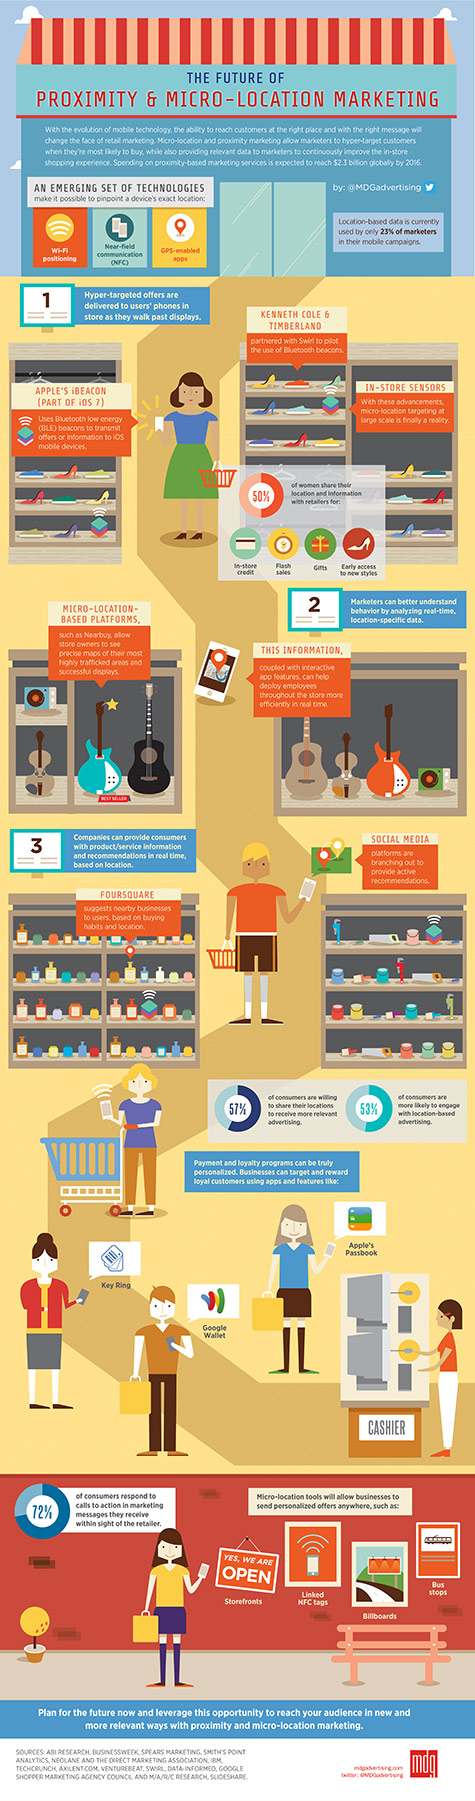 mdg infographic the future of proximity and micro location marketing 475